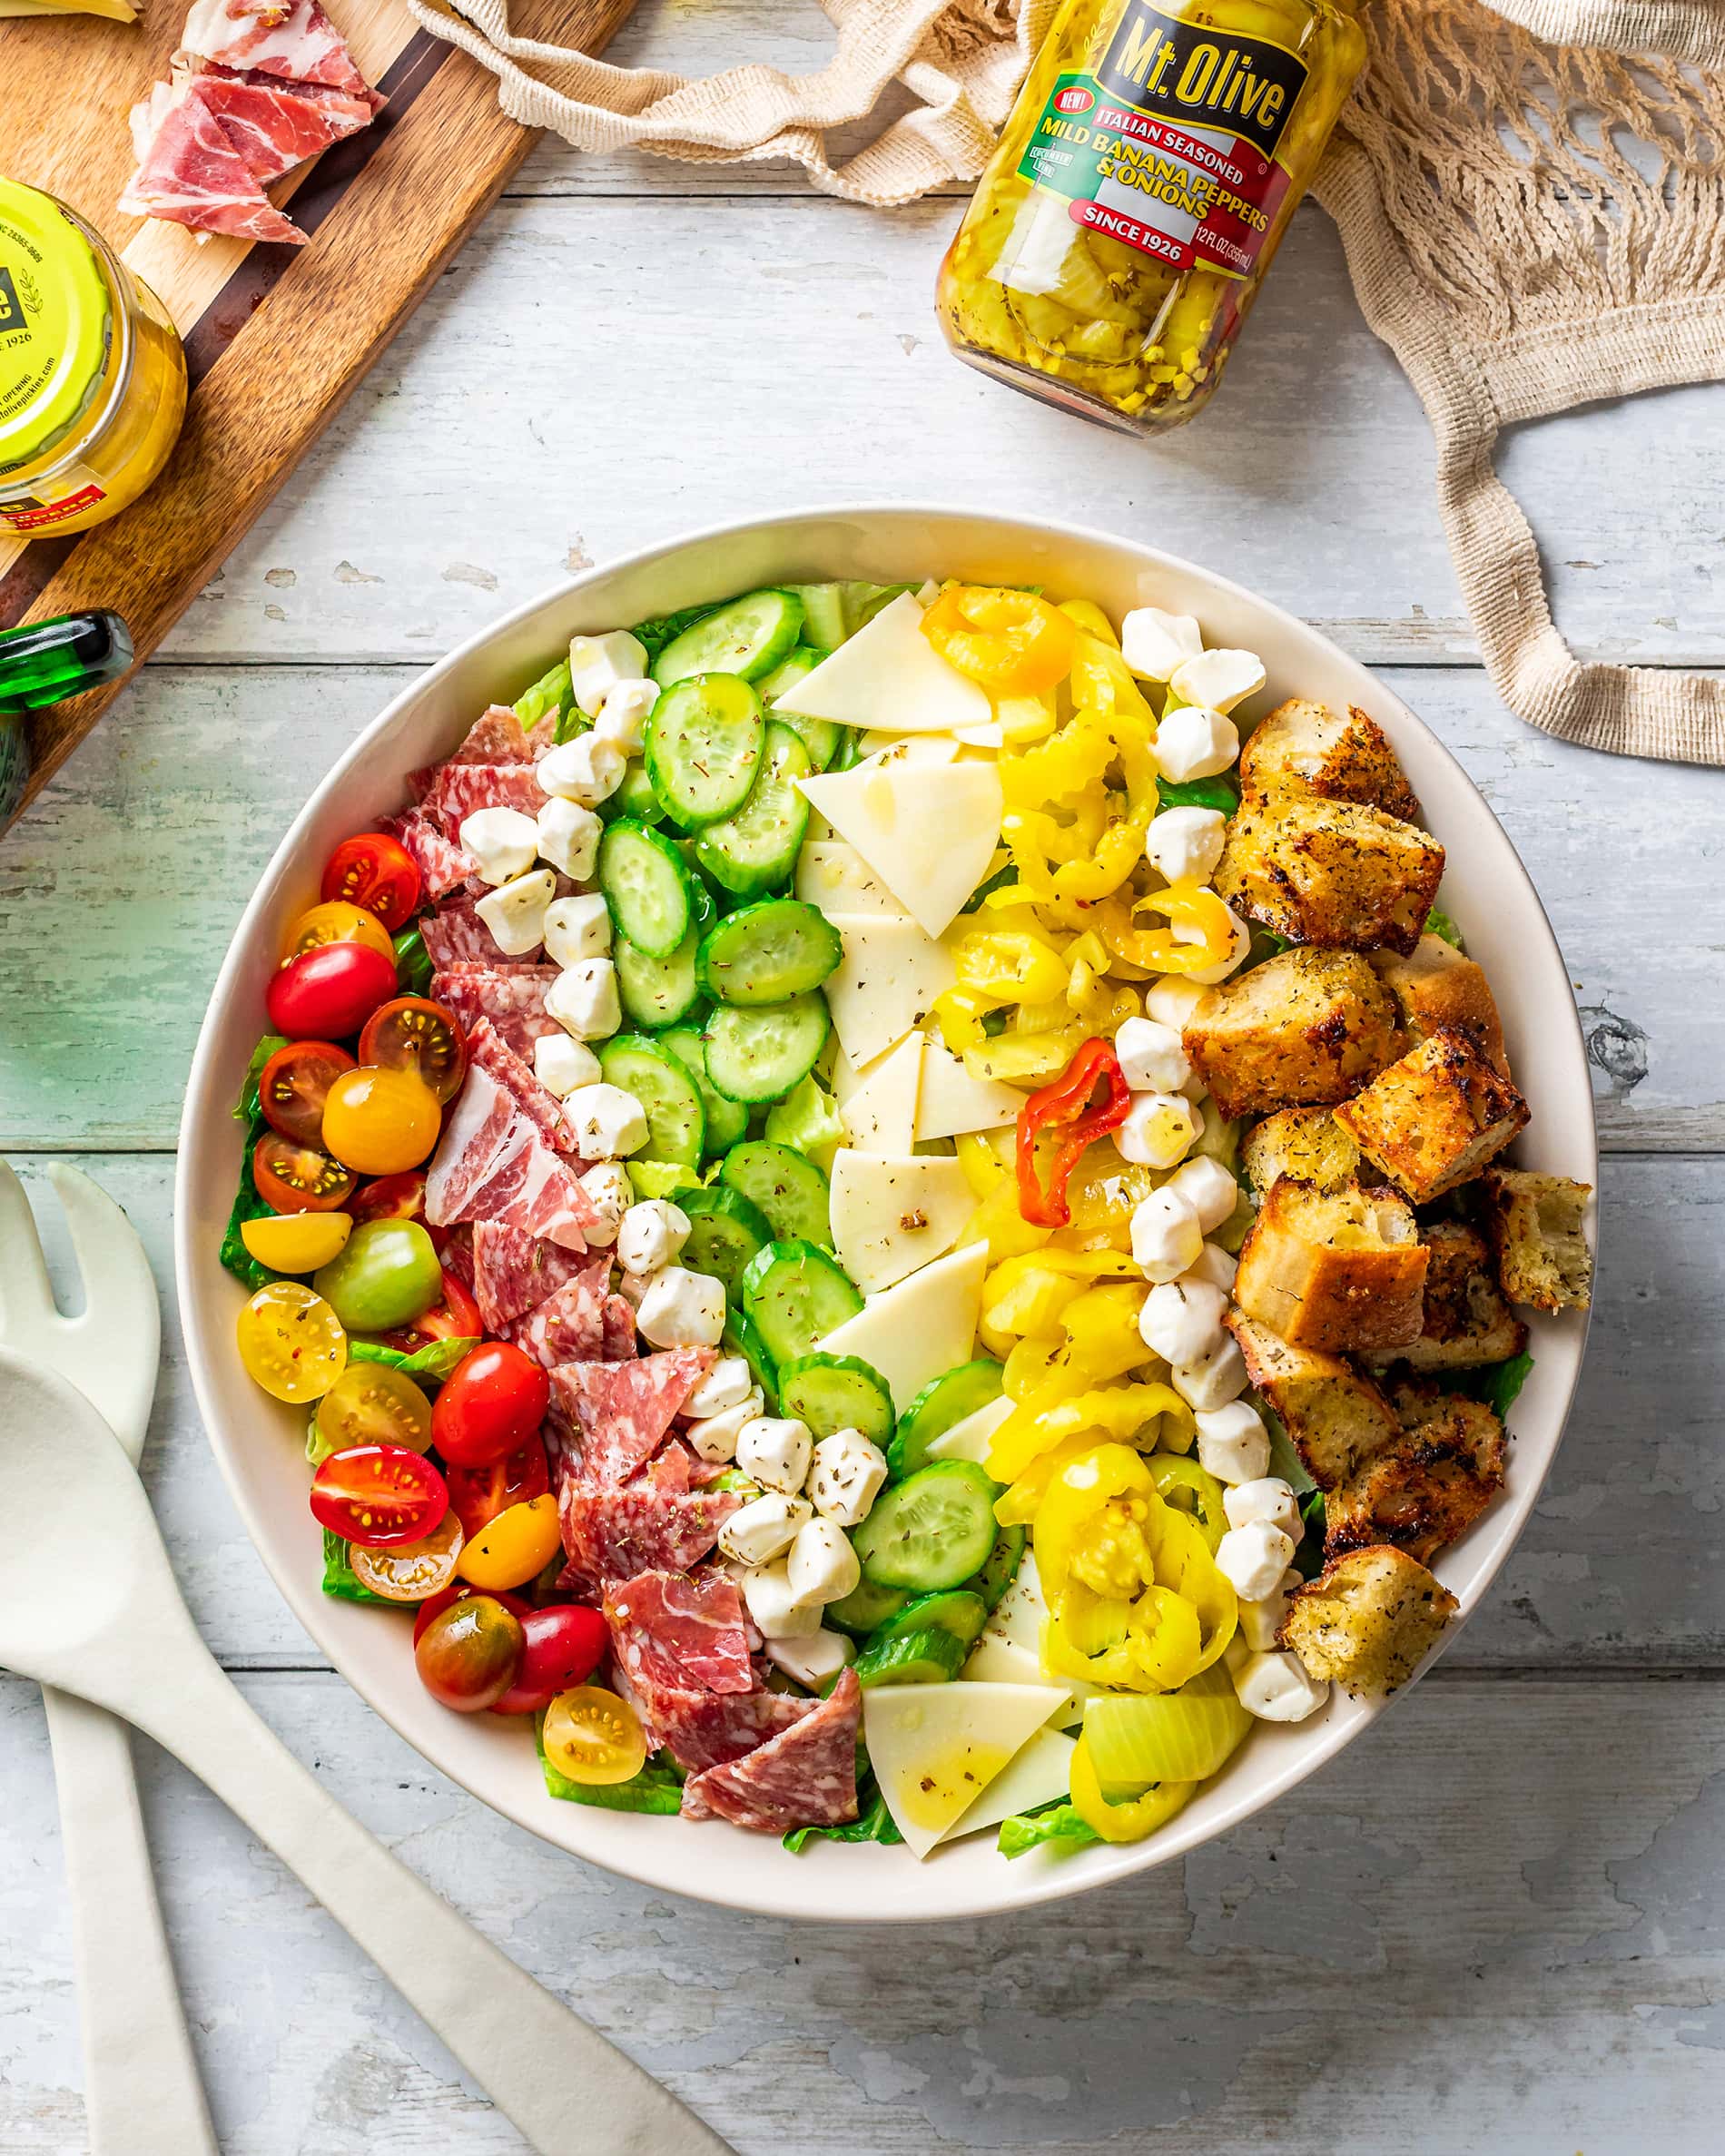 Italian Sub Salad in white bow with white background. Jar of Italian Seasoned peppers at the top. Salad shows tomatoes, meat, cucumbers, peppers and croutons